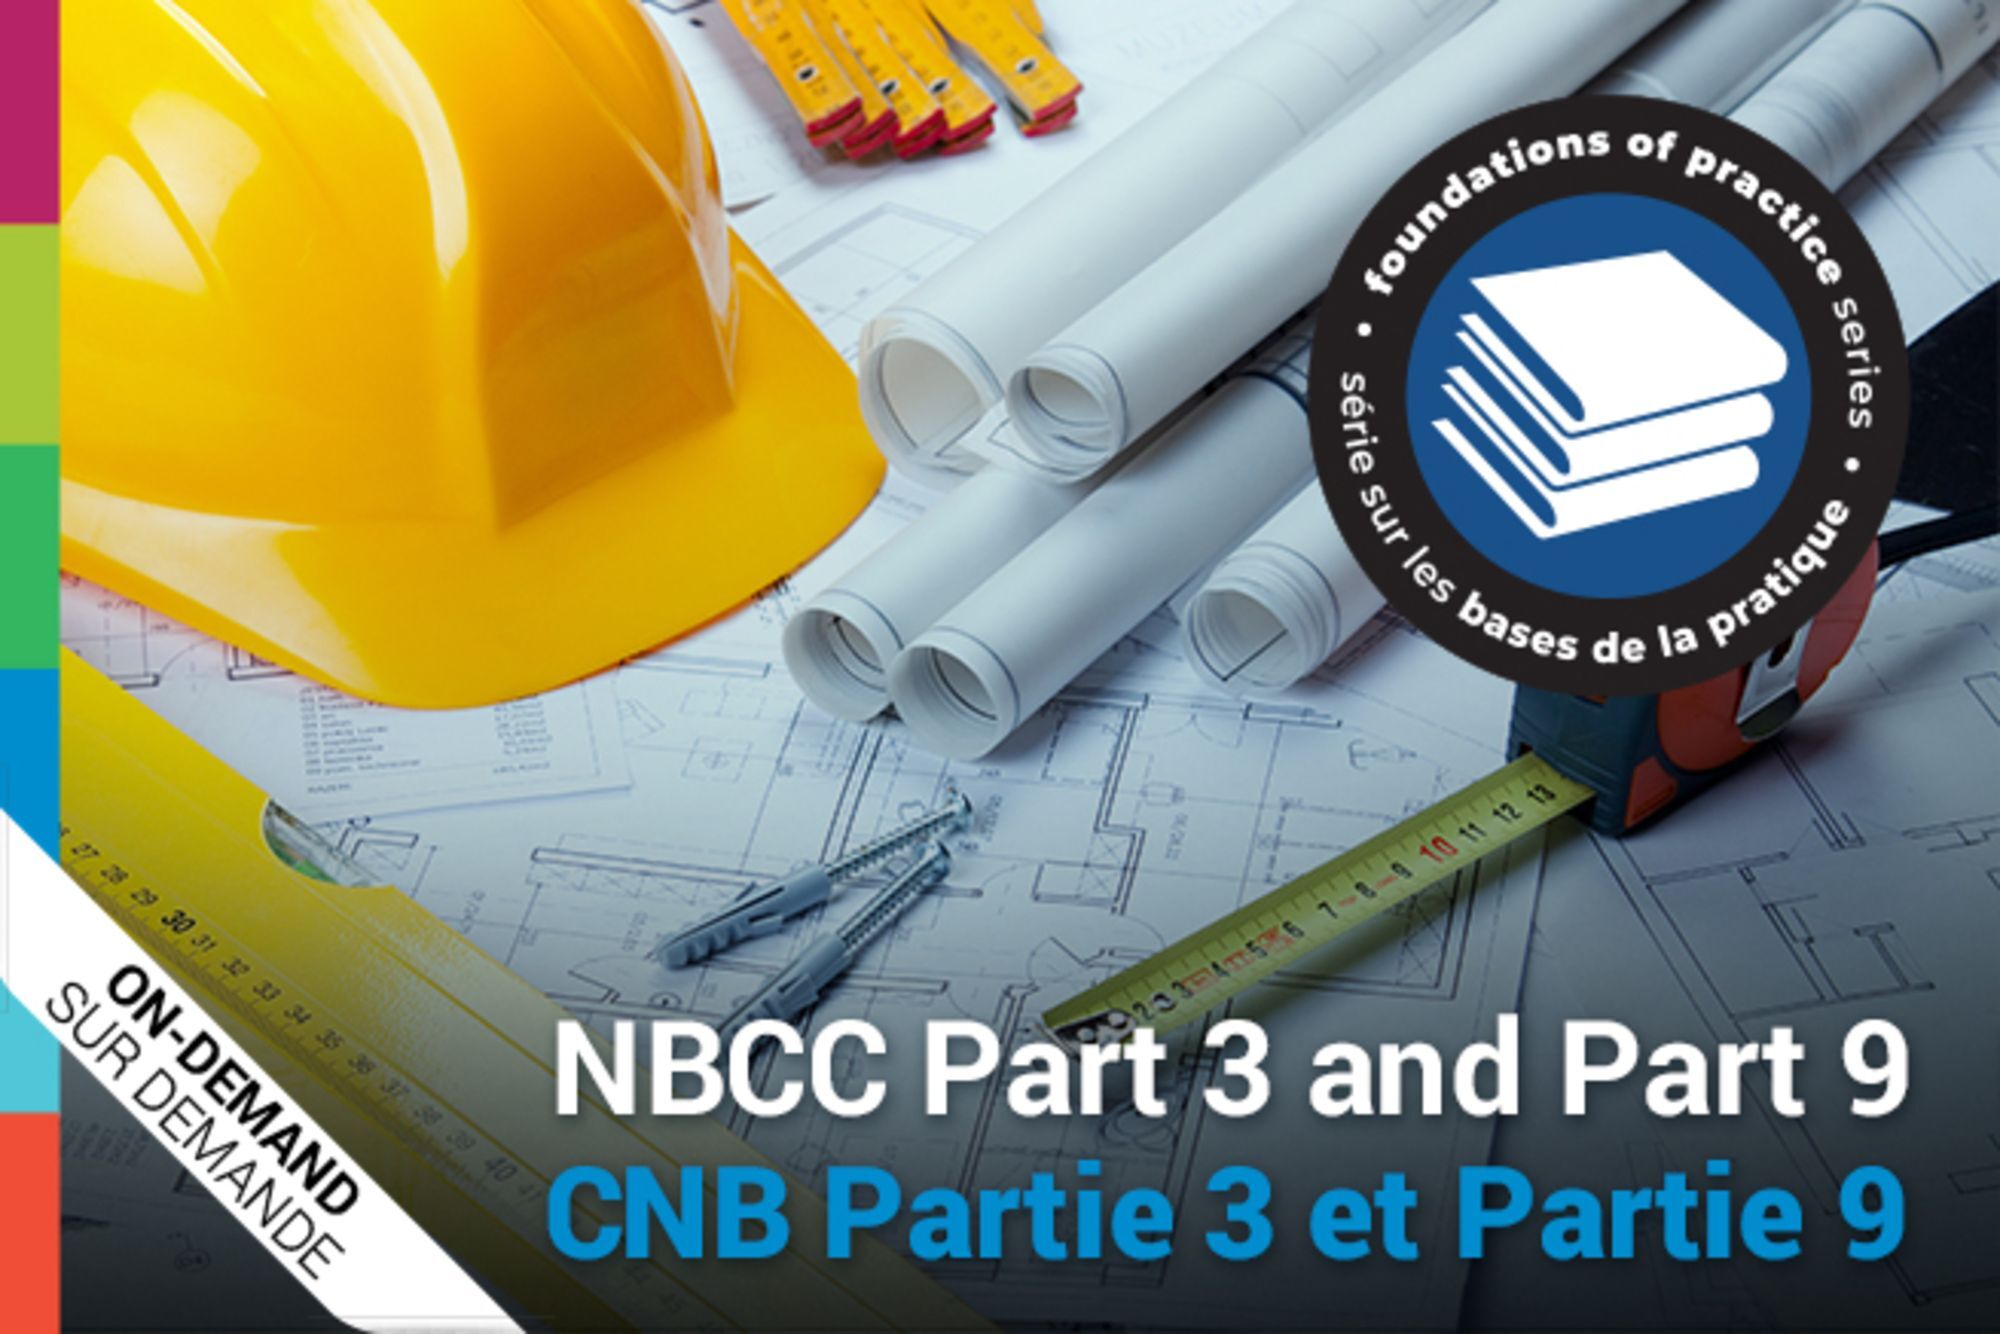 NBCC Part 3 and Part 9 Webinar Poster